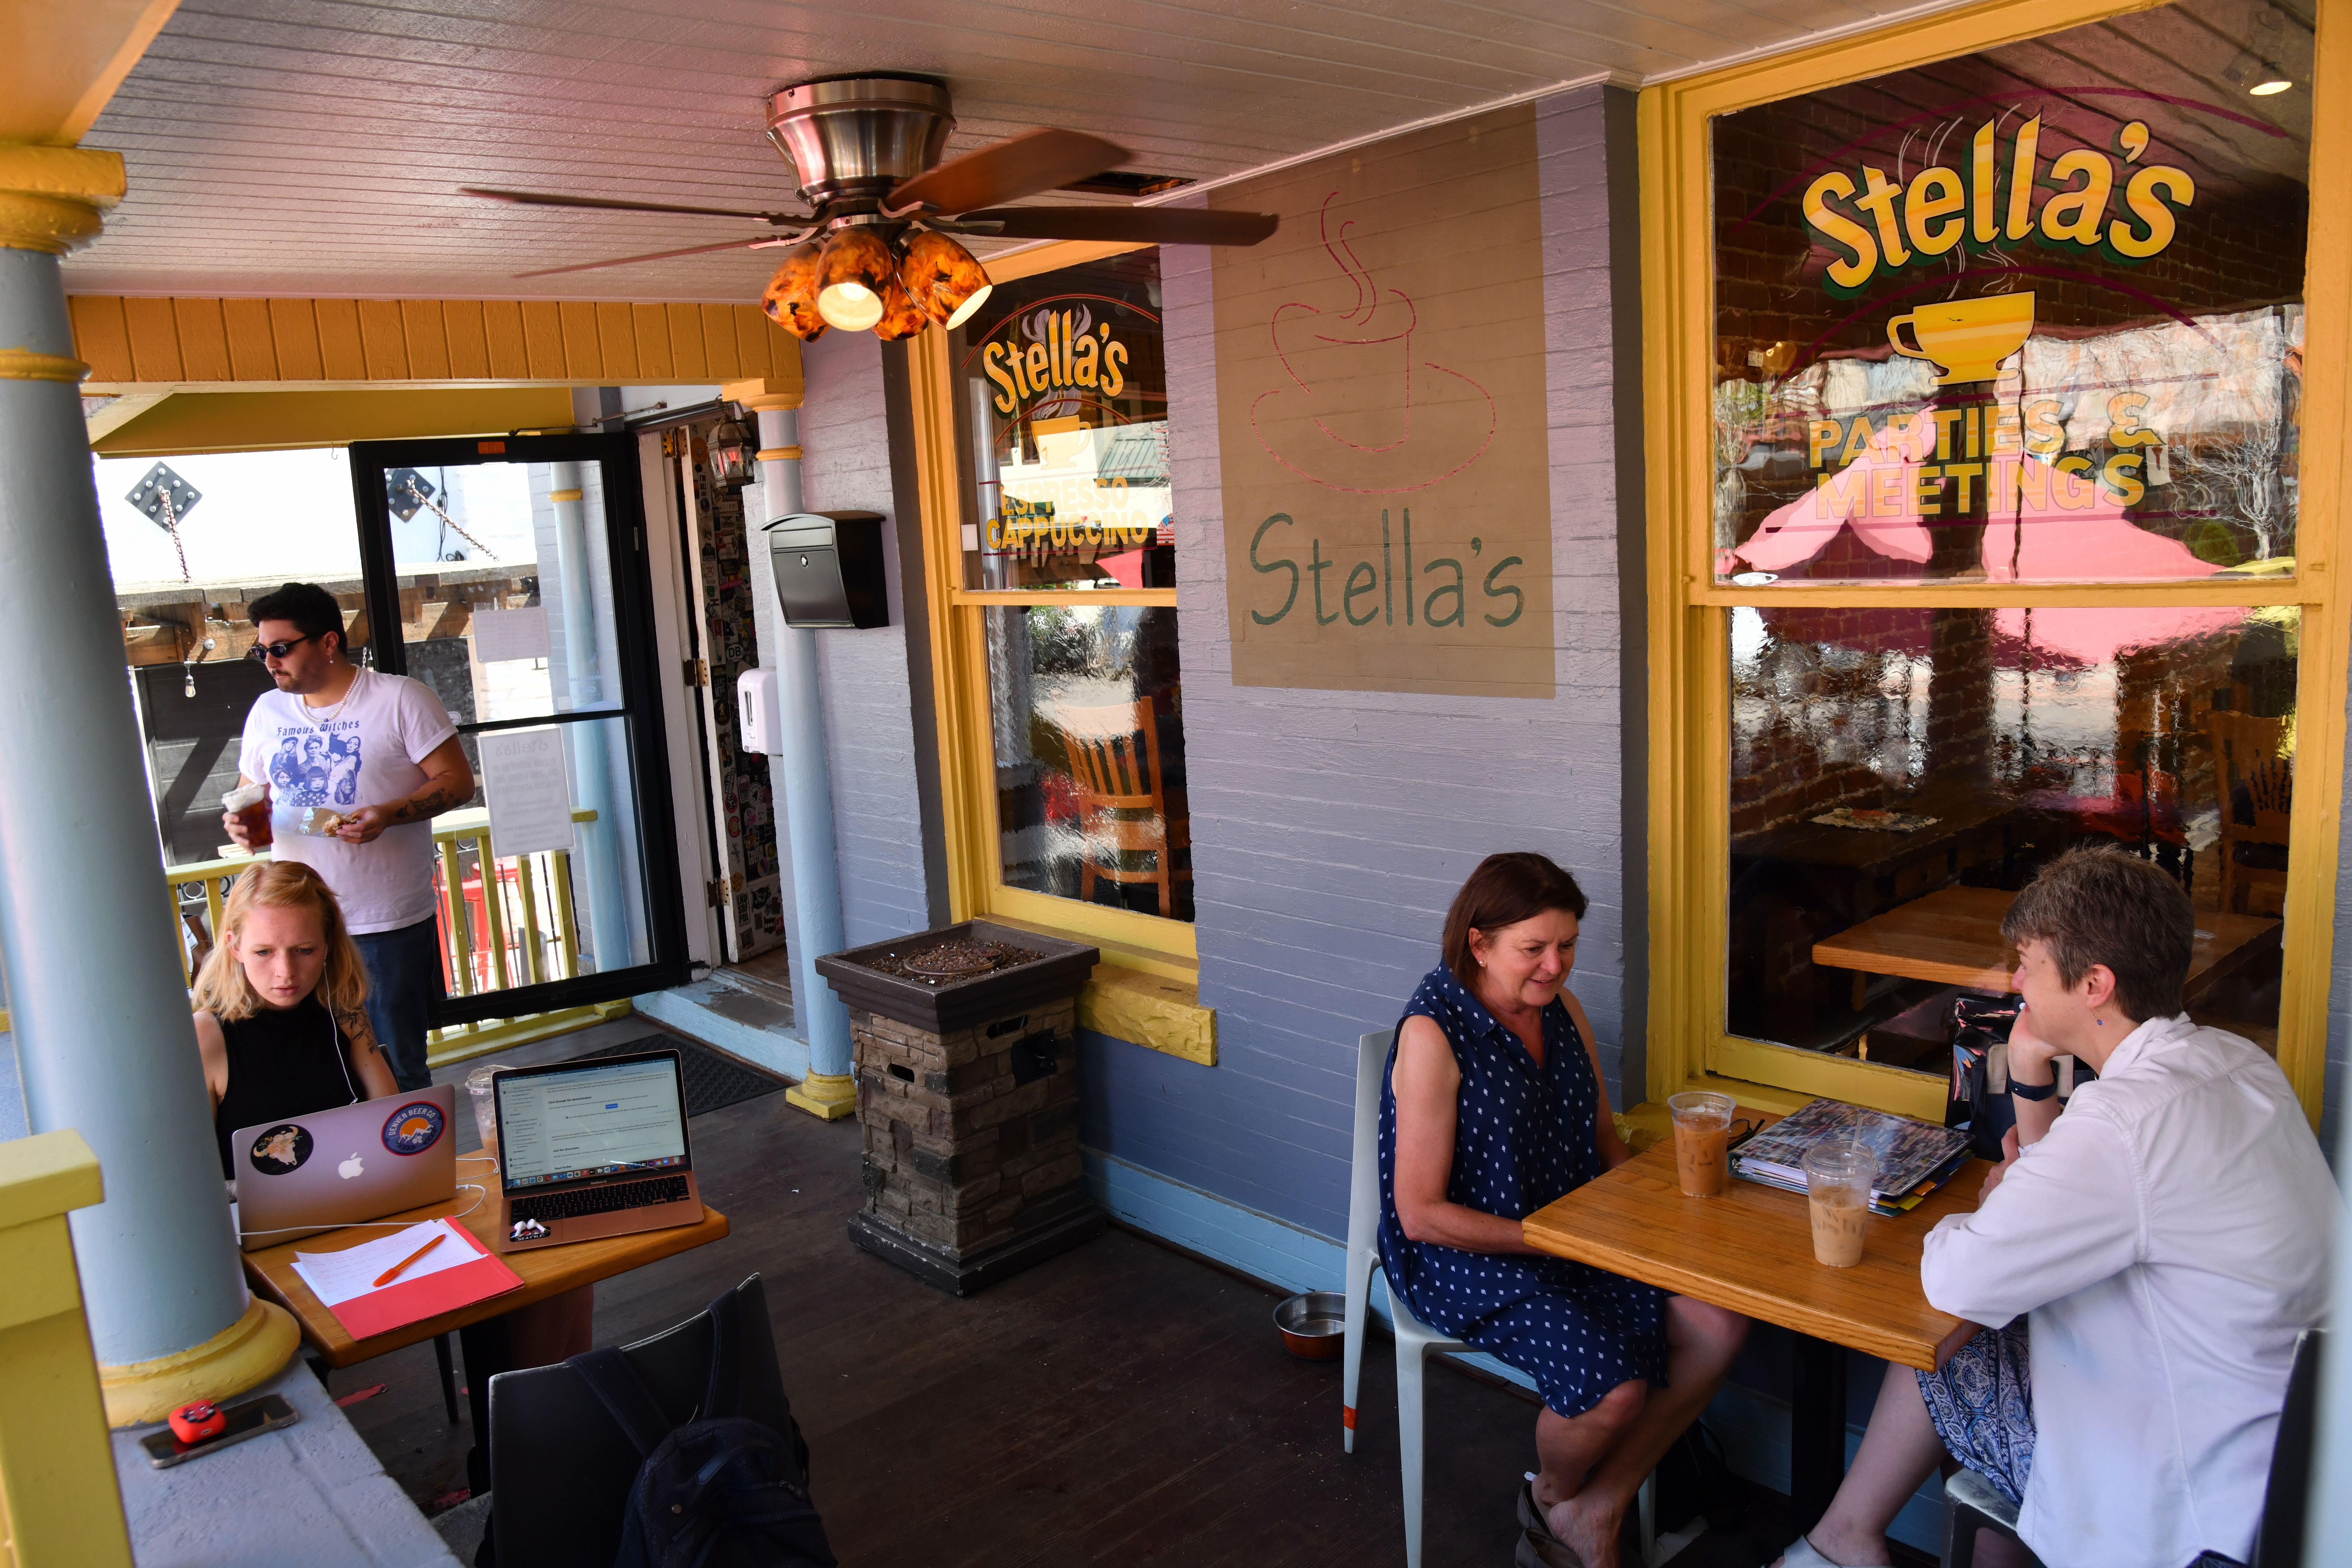 Stella"u2019s Coffee Haus of South Pearl Street in Denver, Colorado on Tuesday, June 15